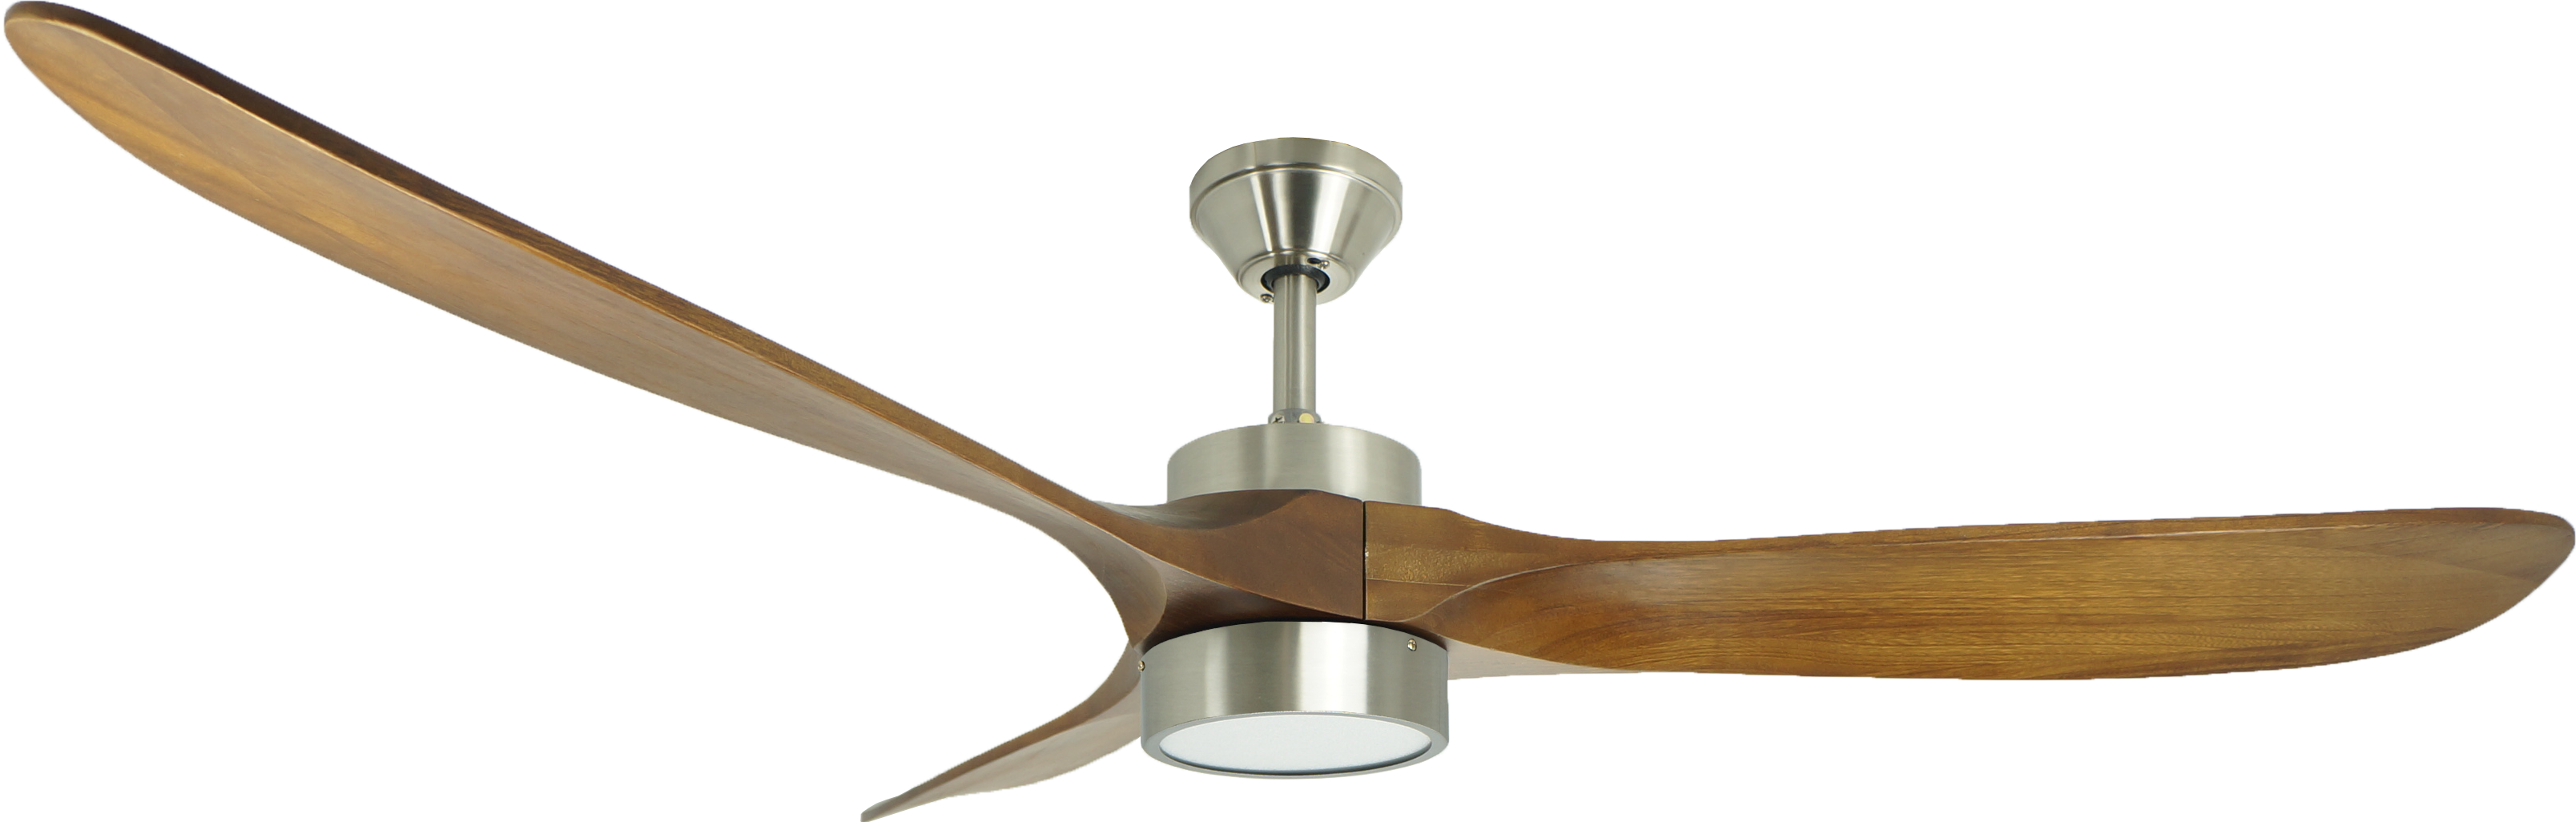 How to Determine a Large Size Ceiling Fan For Your Home